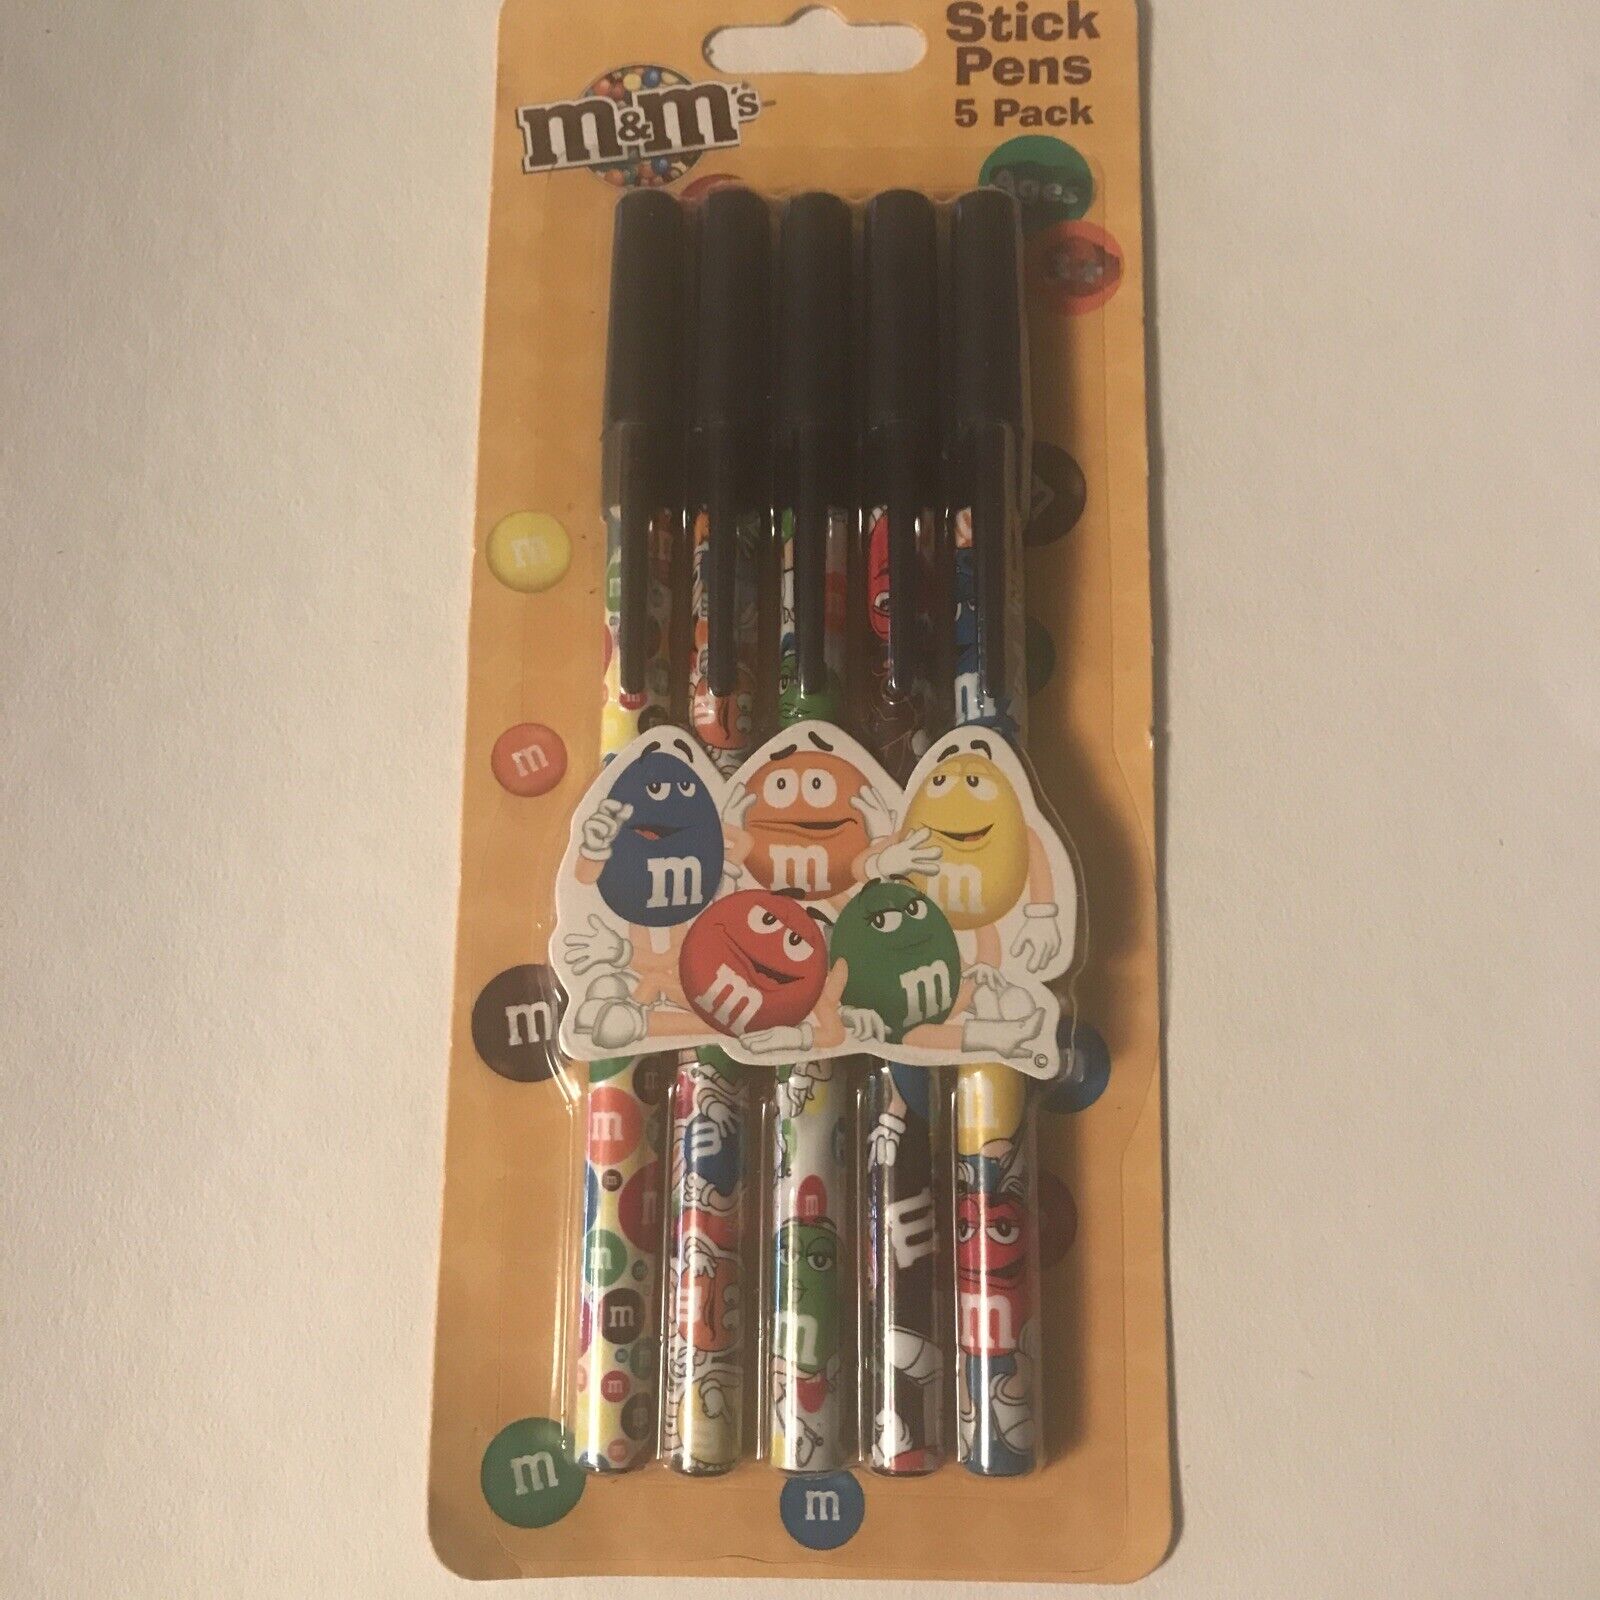 M&M\'s Stick Pens 5 Pack Innovative Design 2008 New Hard to Find